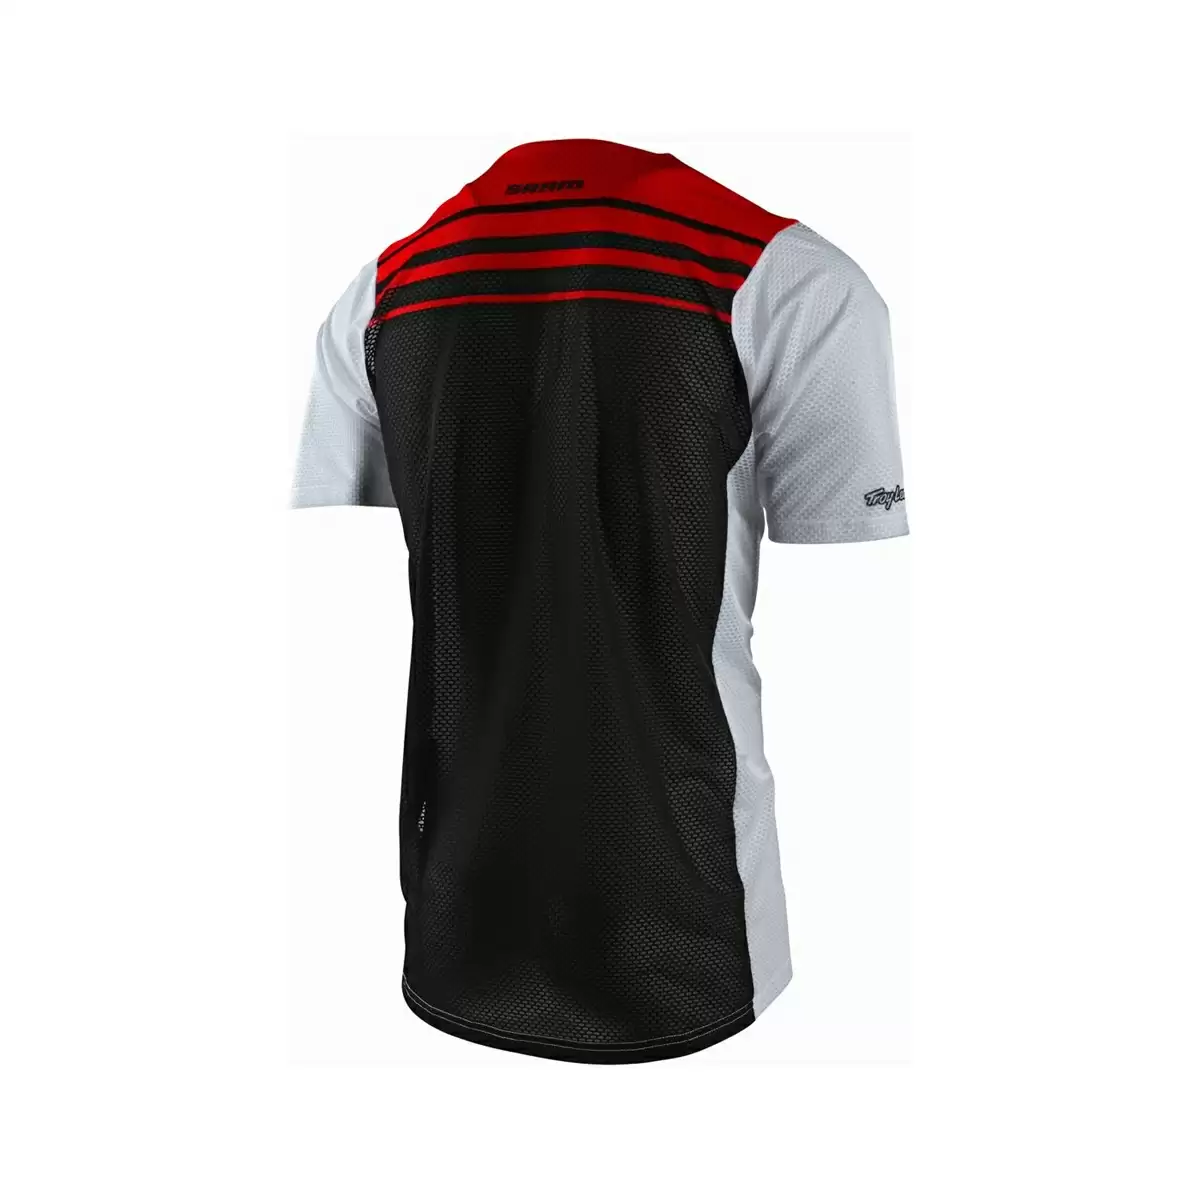 Maillot Skyline Air Sram Manches Courtes Noir/Rouge Taille M #1